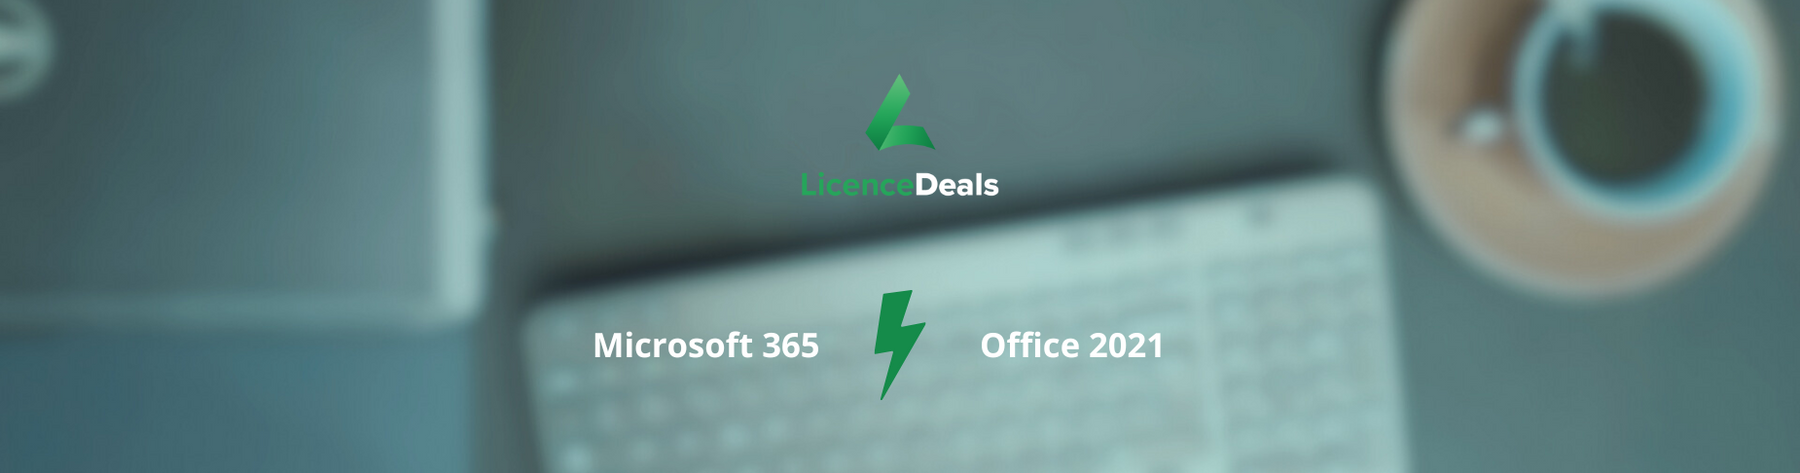 Microsoft 365 vs MS Office 2021: Which is the Right Choice for You?